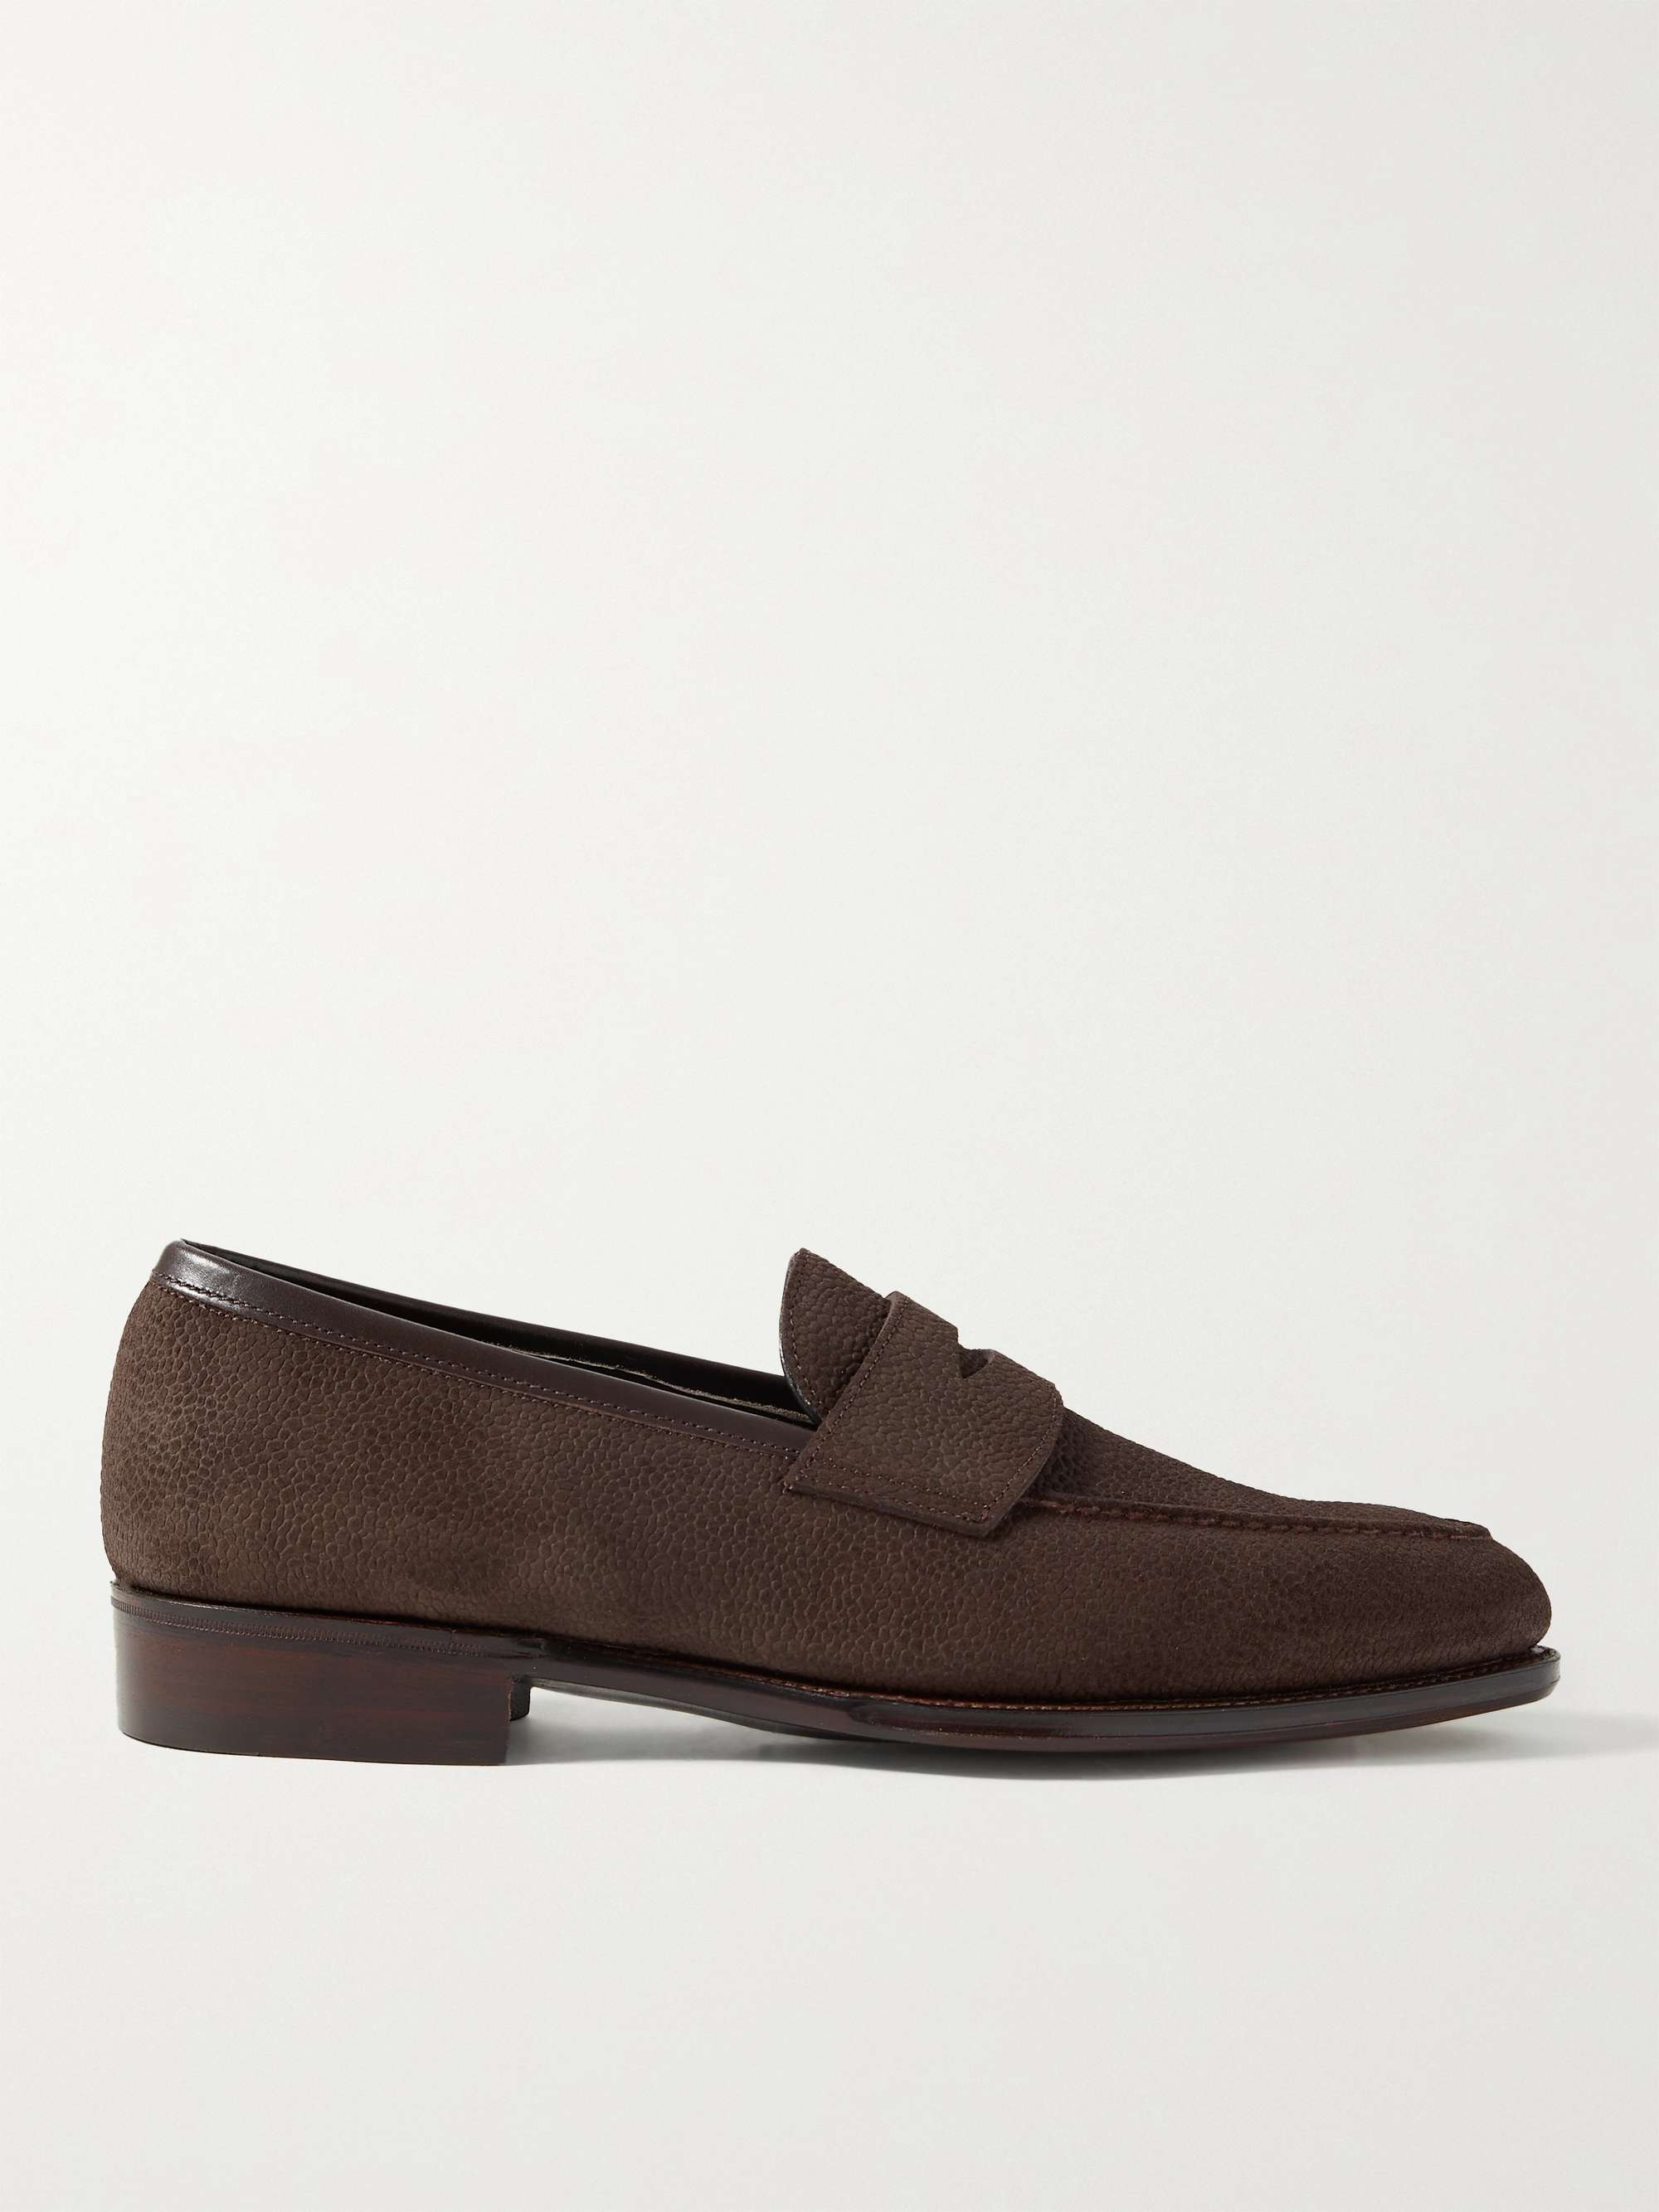 GEORGE CLEVERLEY Bradley III Leather-Trimmed Pebble-Grain Suede Penny Loafers